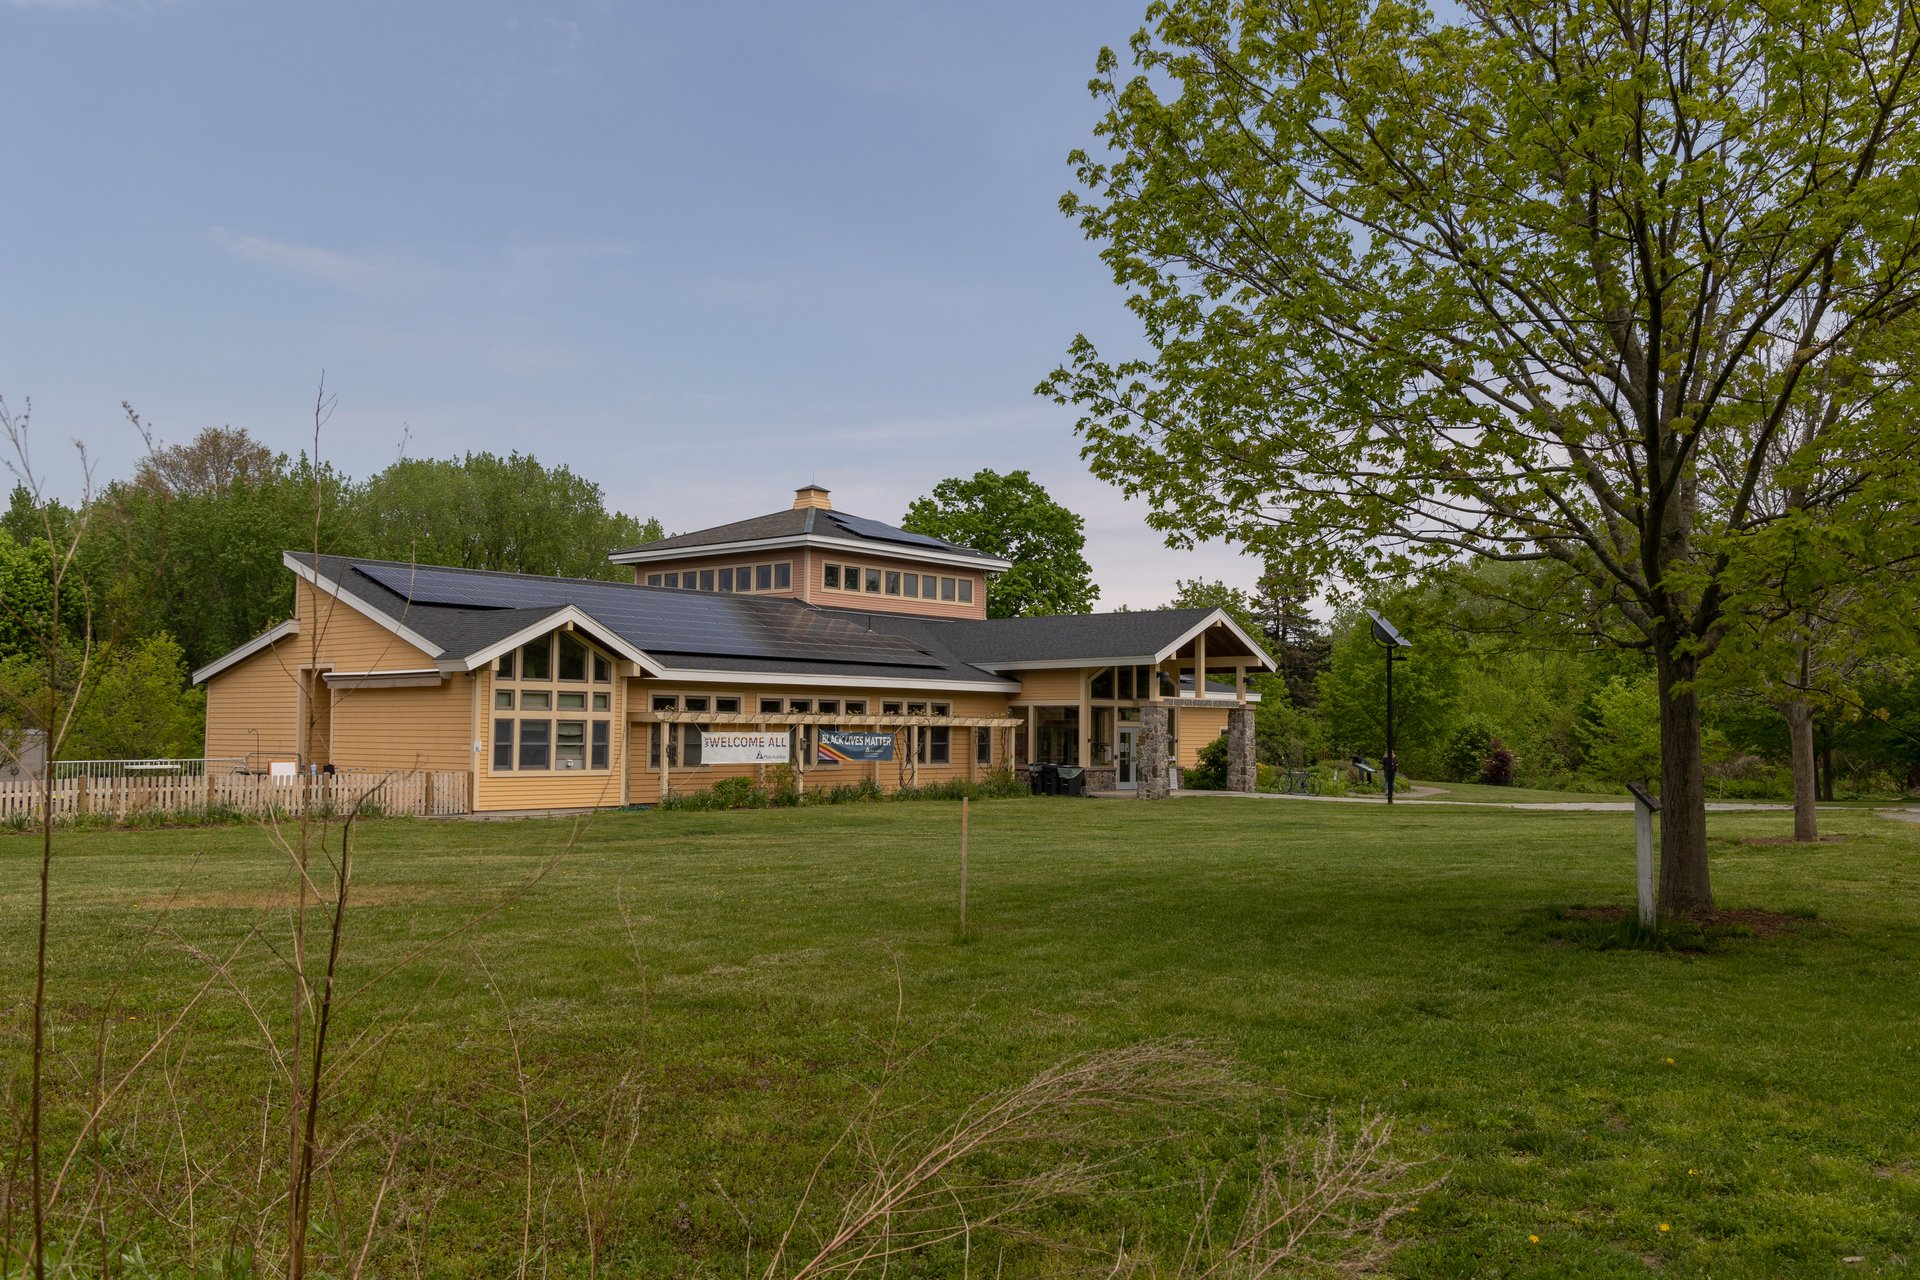 View of the Boston Nature Center building